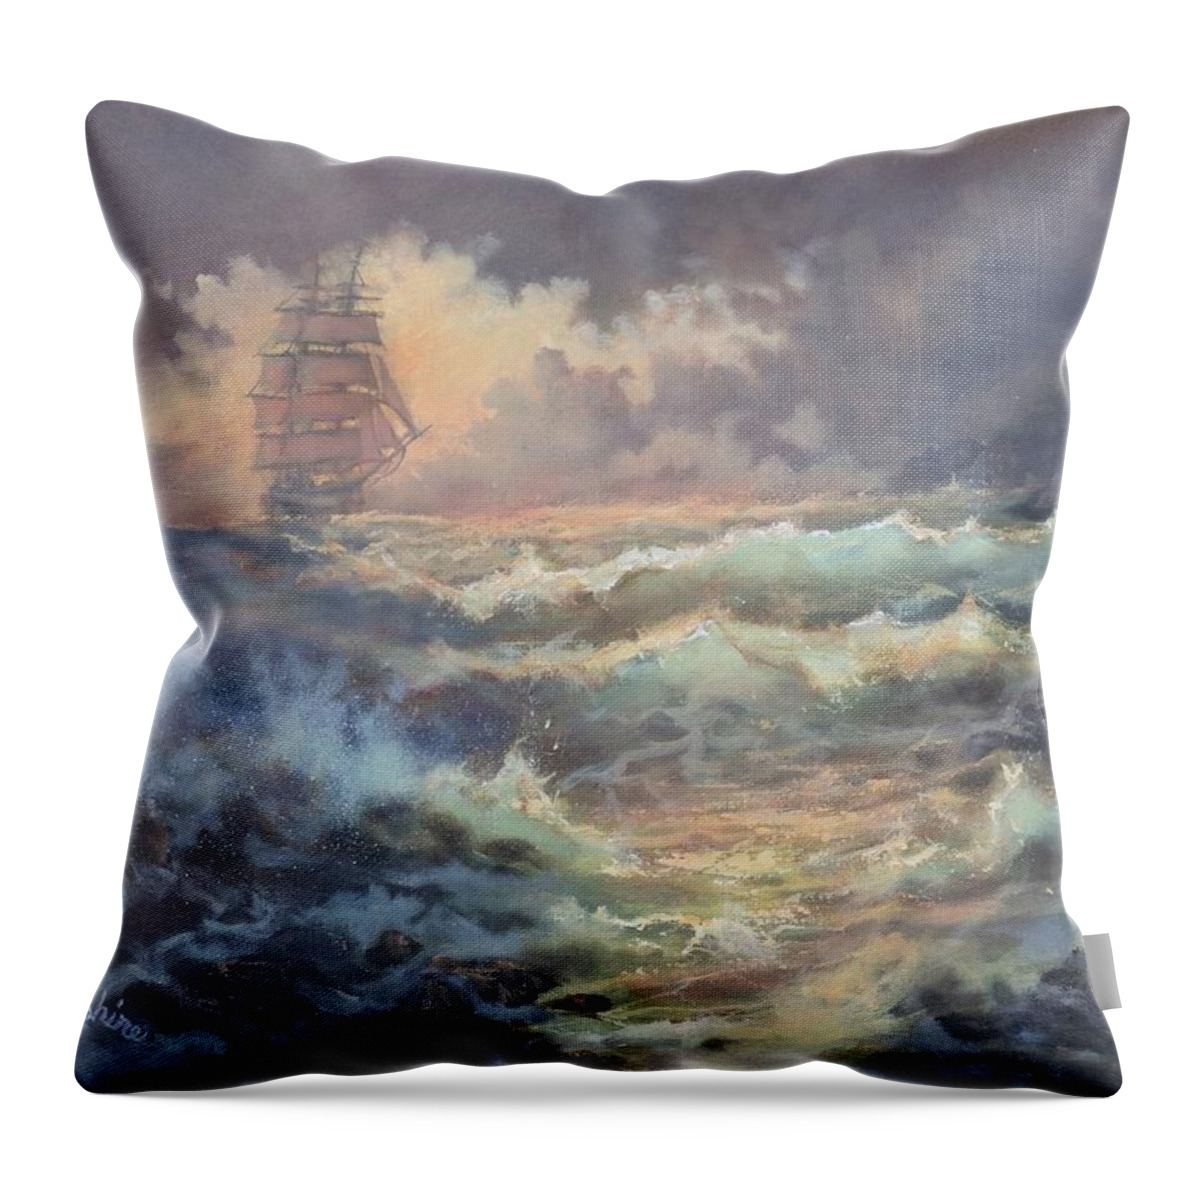 Mysterious Island Throw Pillow featuring the painting Mysterious Island by Tom Shropshire